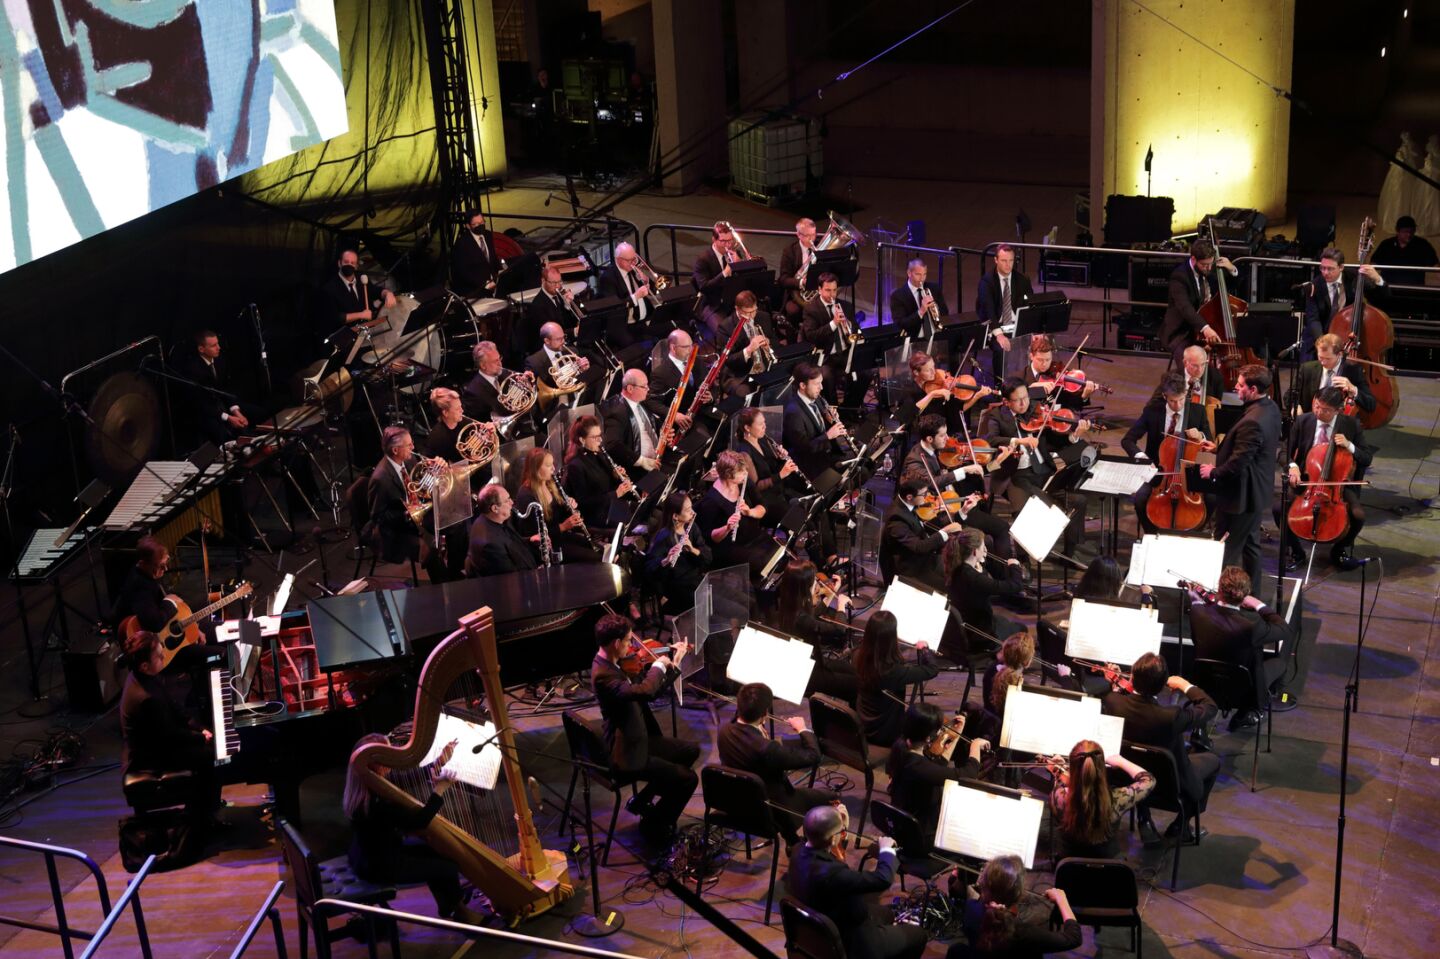 Conductor Sean O'Loughlin and the San Diego Symphony Orchestra perform at the Salk Institute